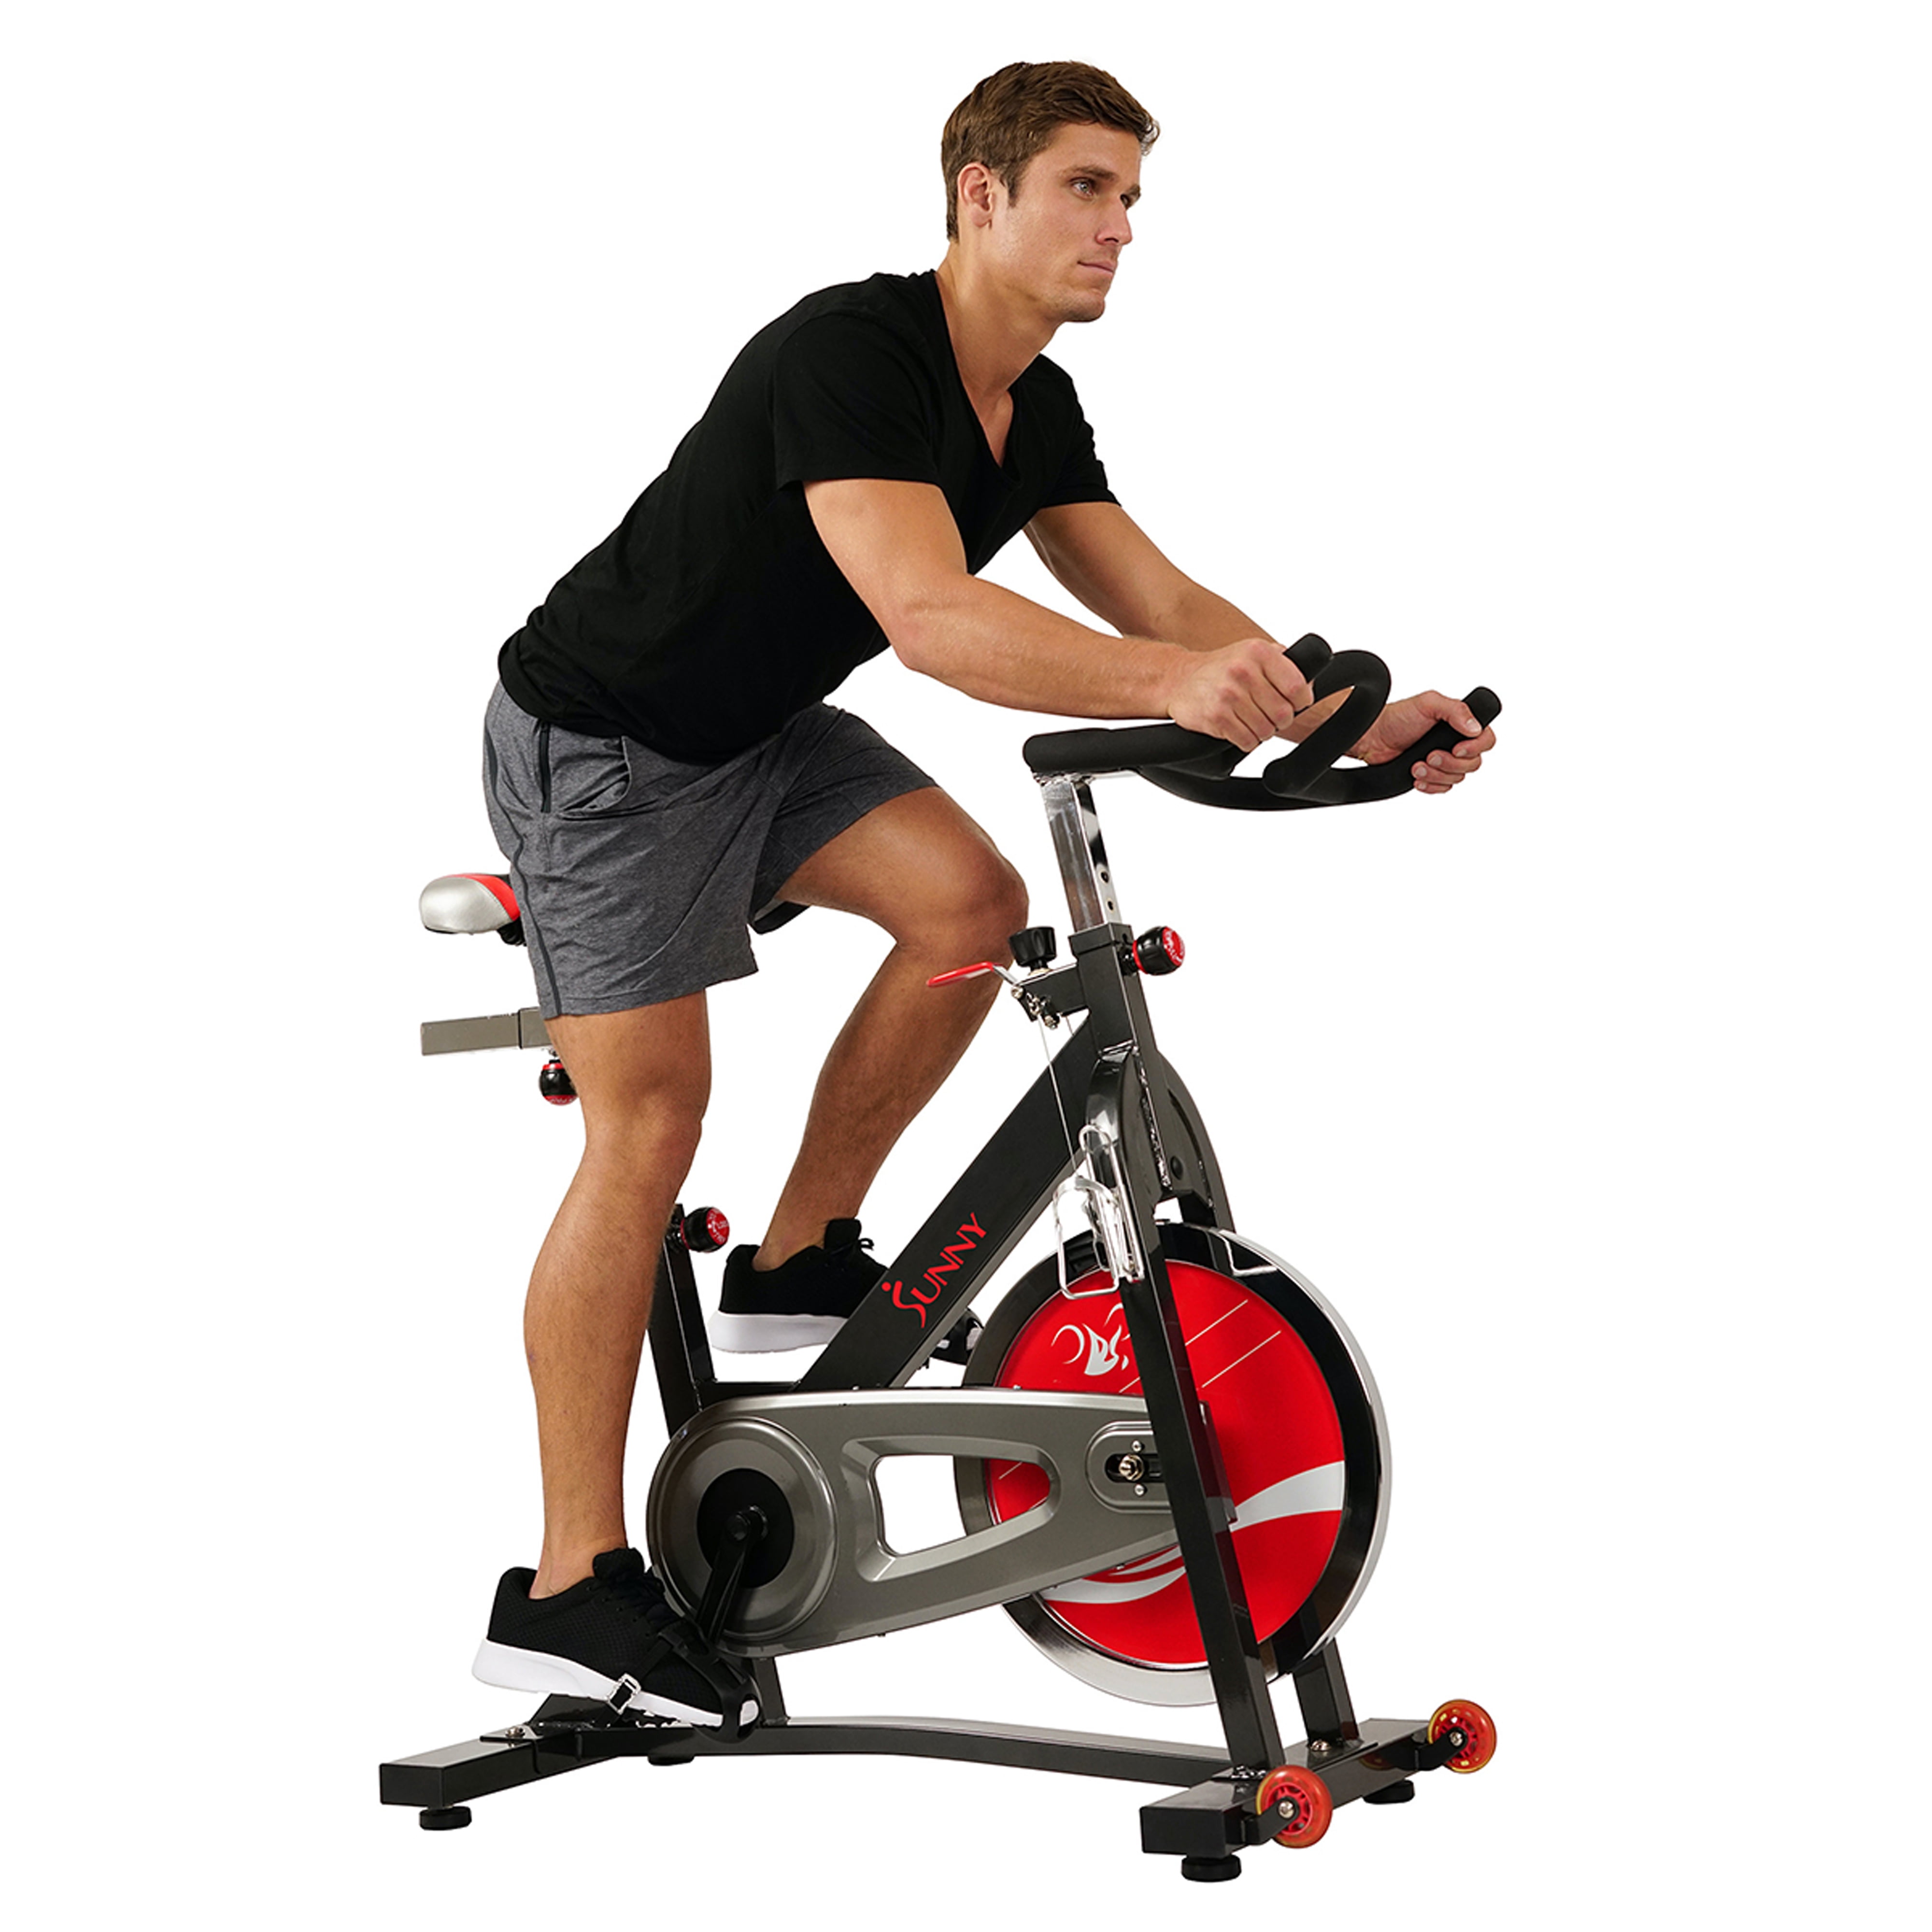 Sunny Health & Fitness SF-B1401 Chain Drive Indoor Cycling Trainer Exer...